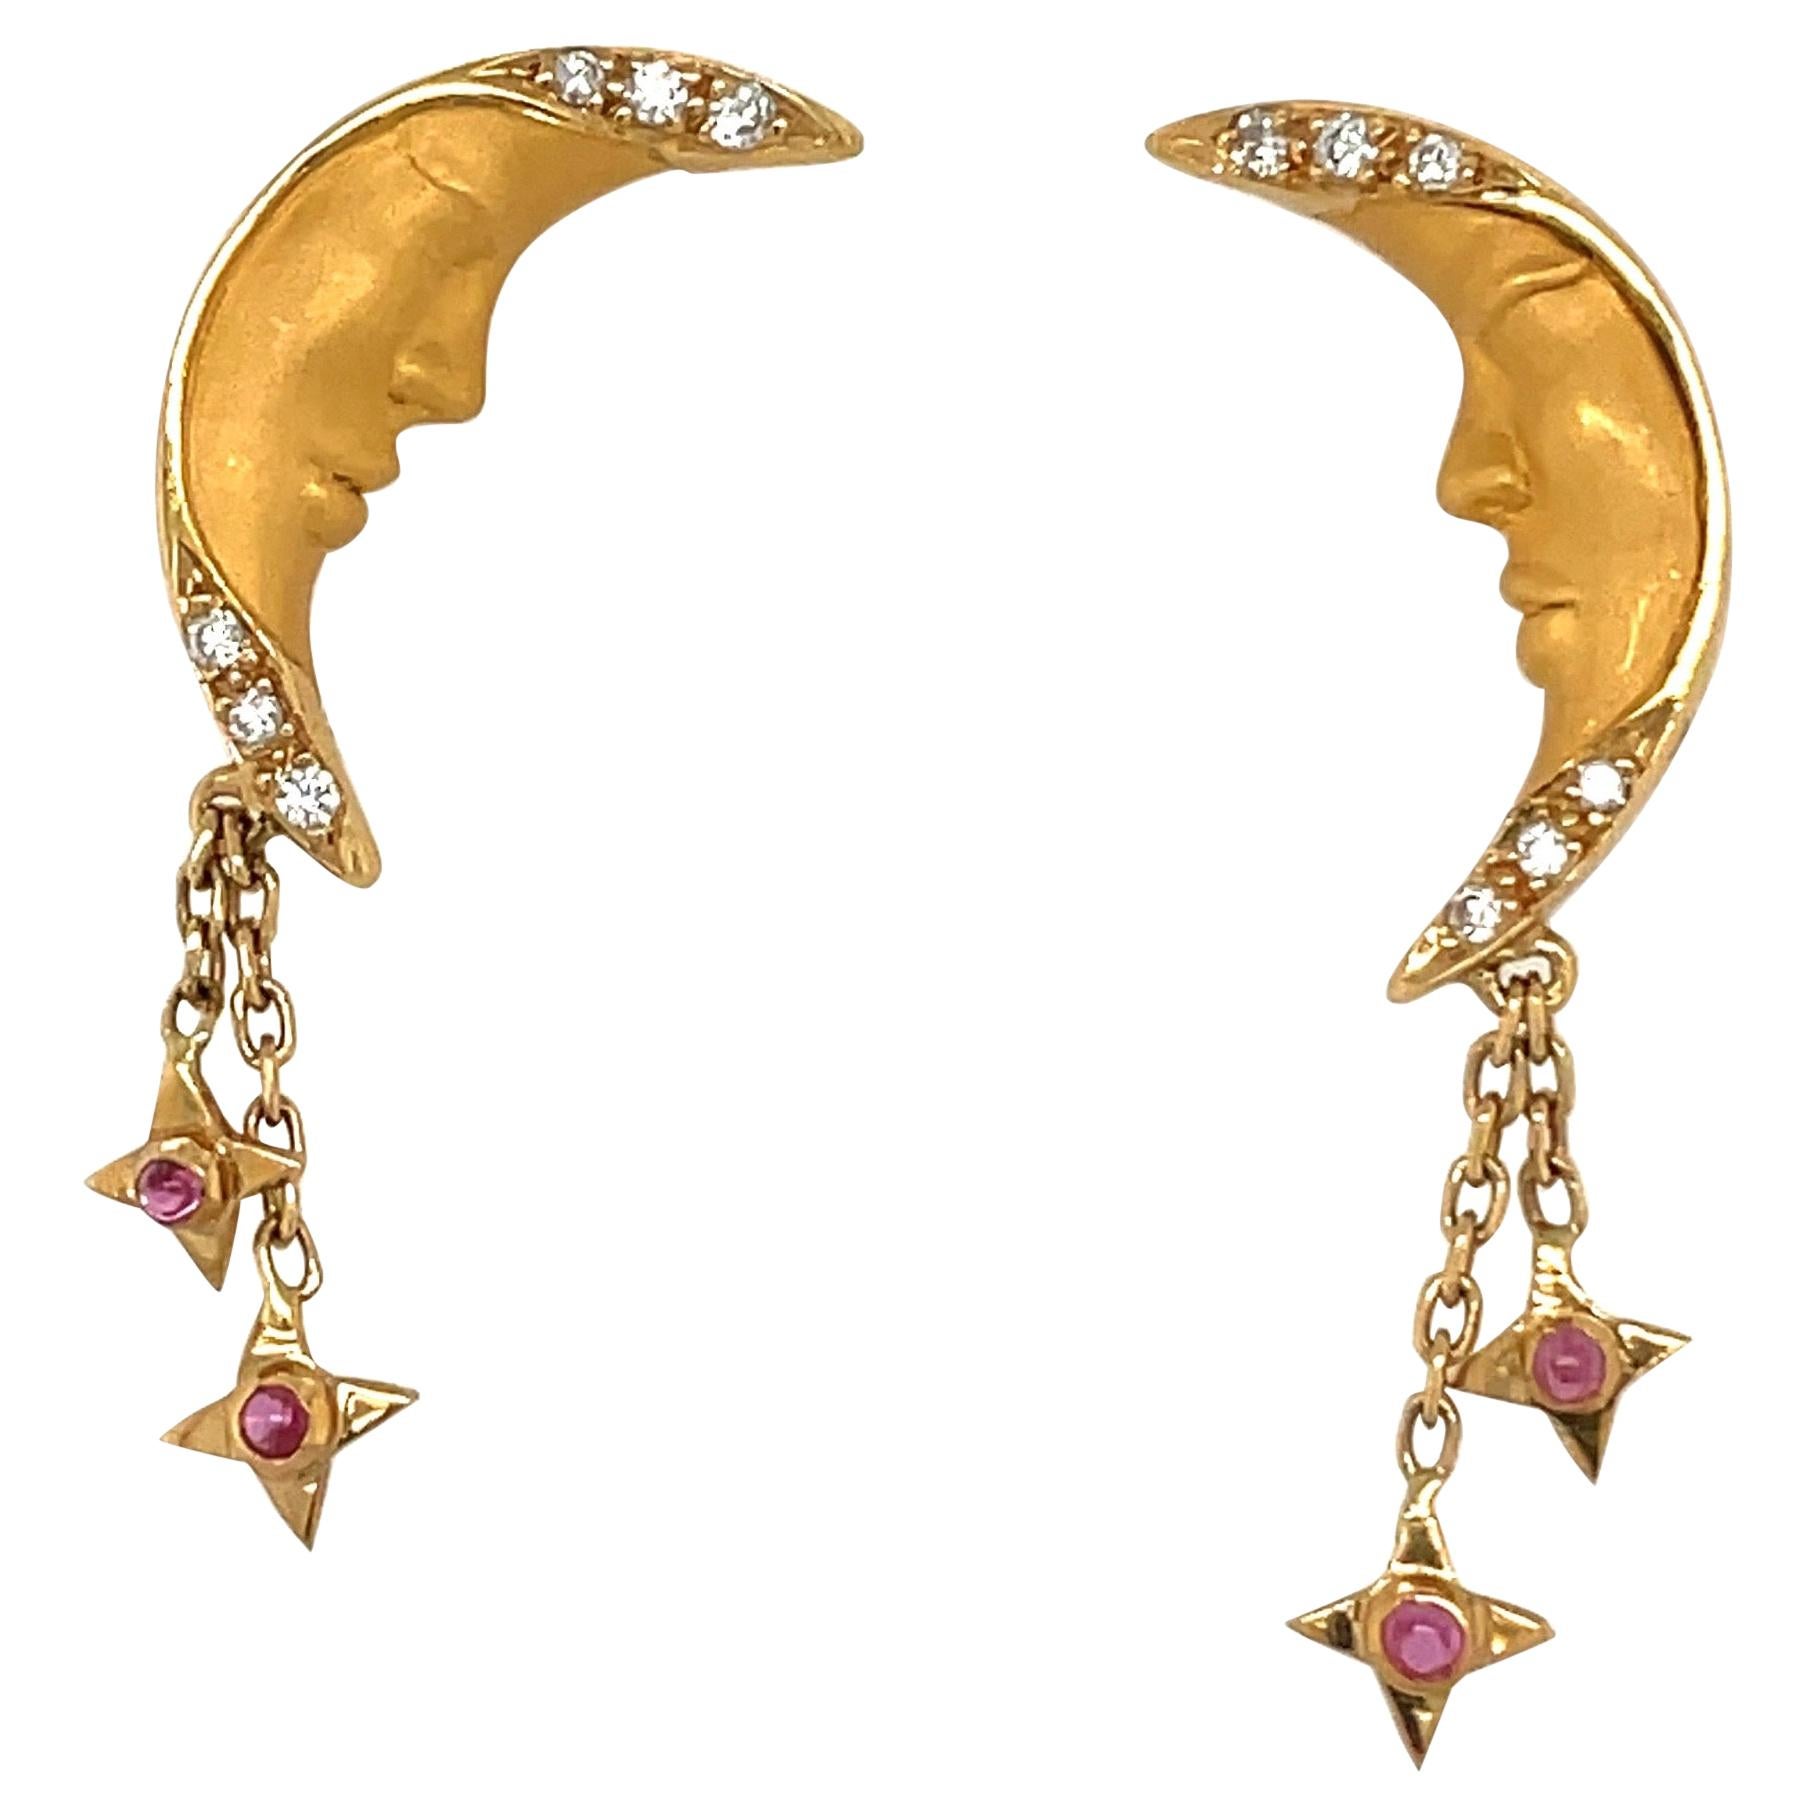 Carrera Y Carrera 18KT Yellow Gold Crescent Moon Earrings with Diamond & Ruby